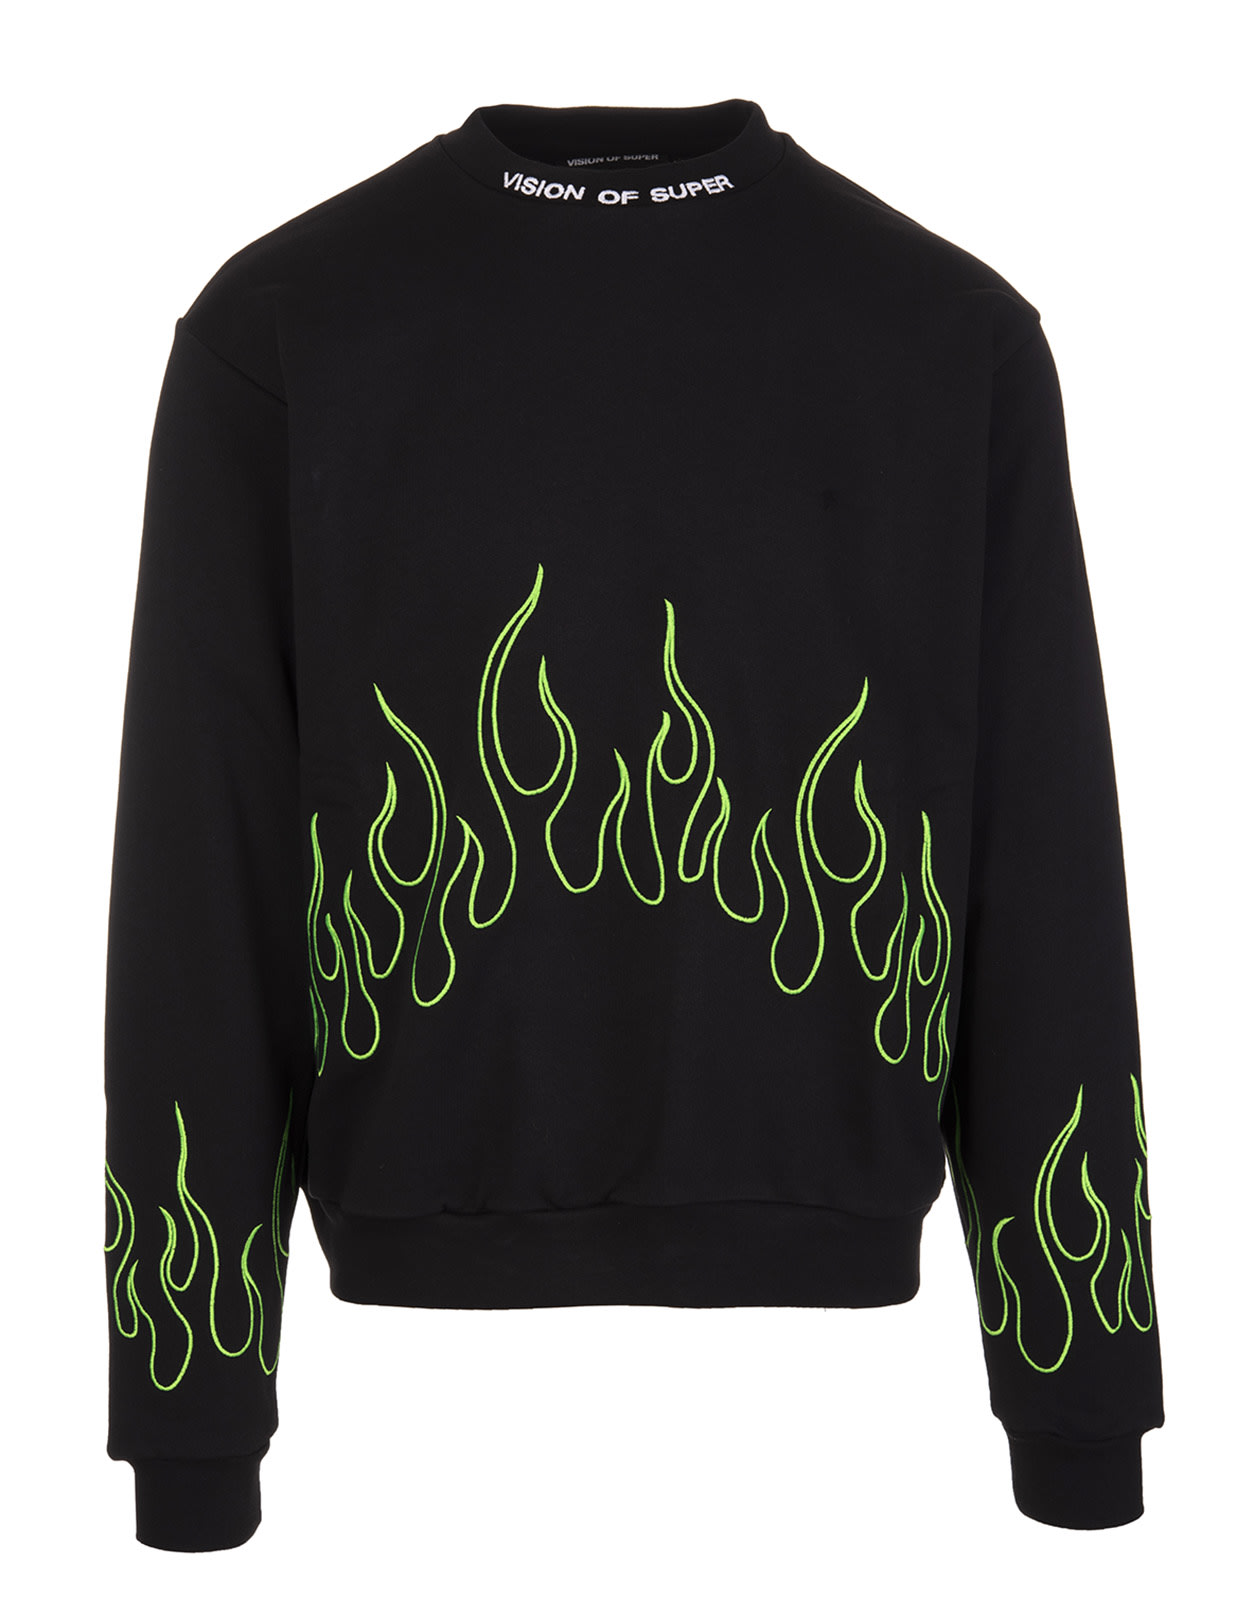 Vision of Super Man Black Sweatshirt With Embroidered Green Flames